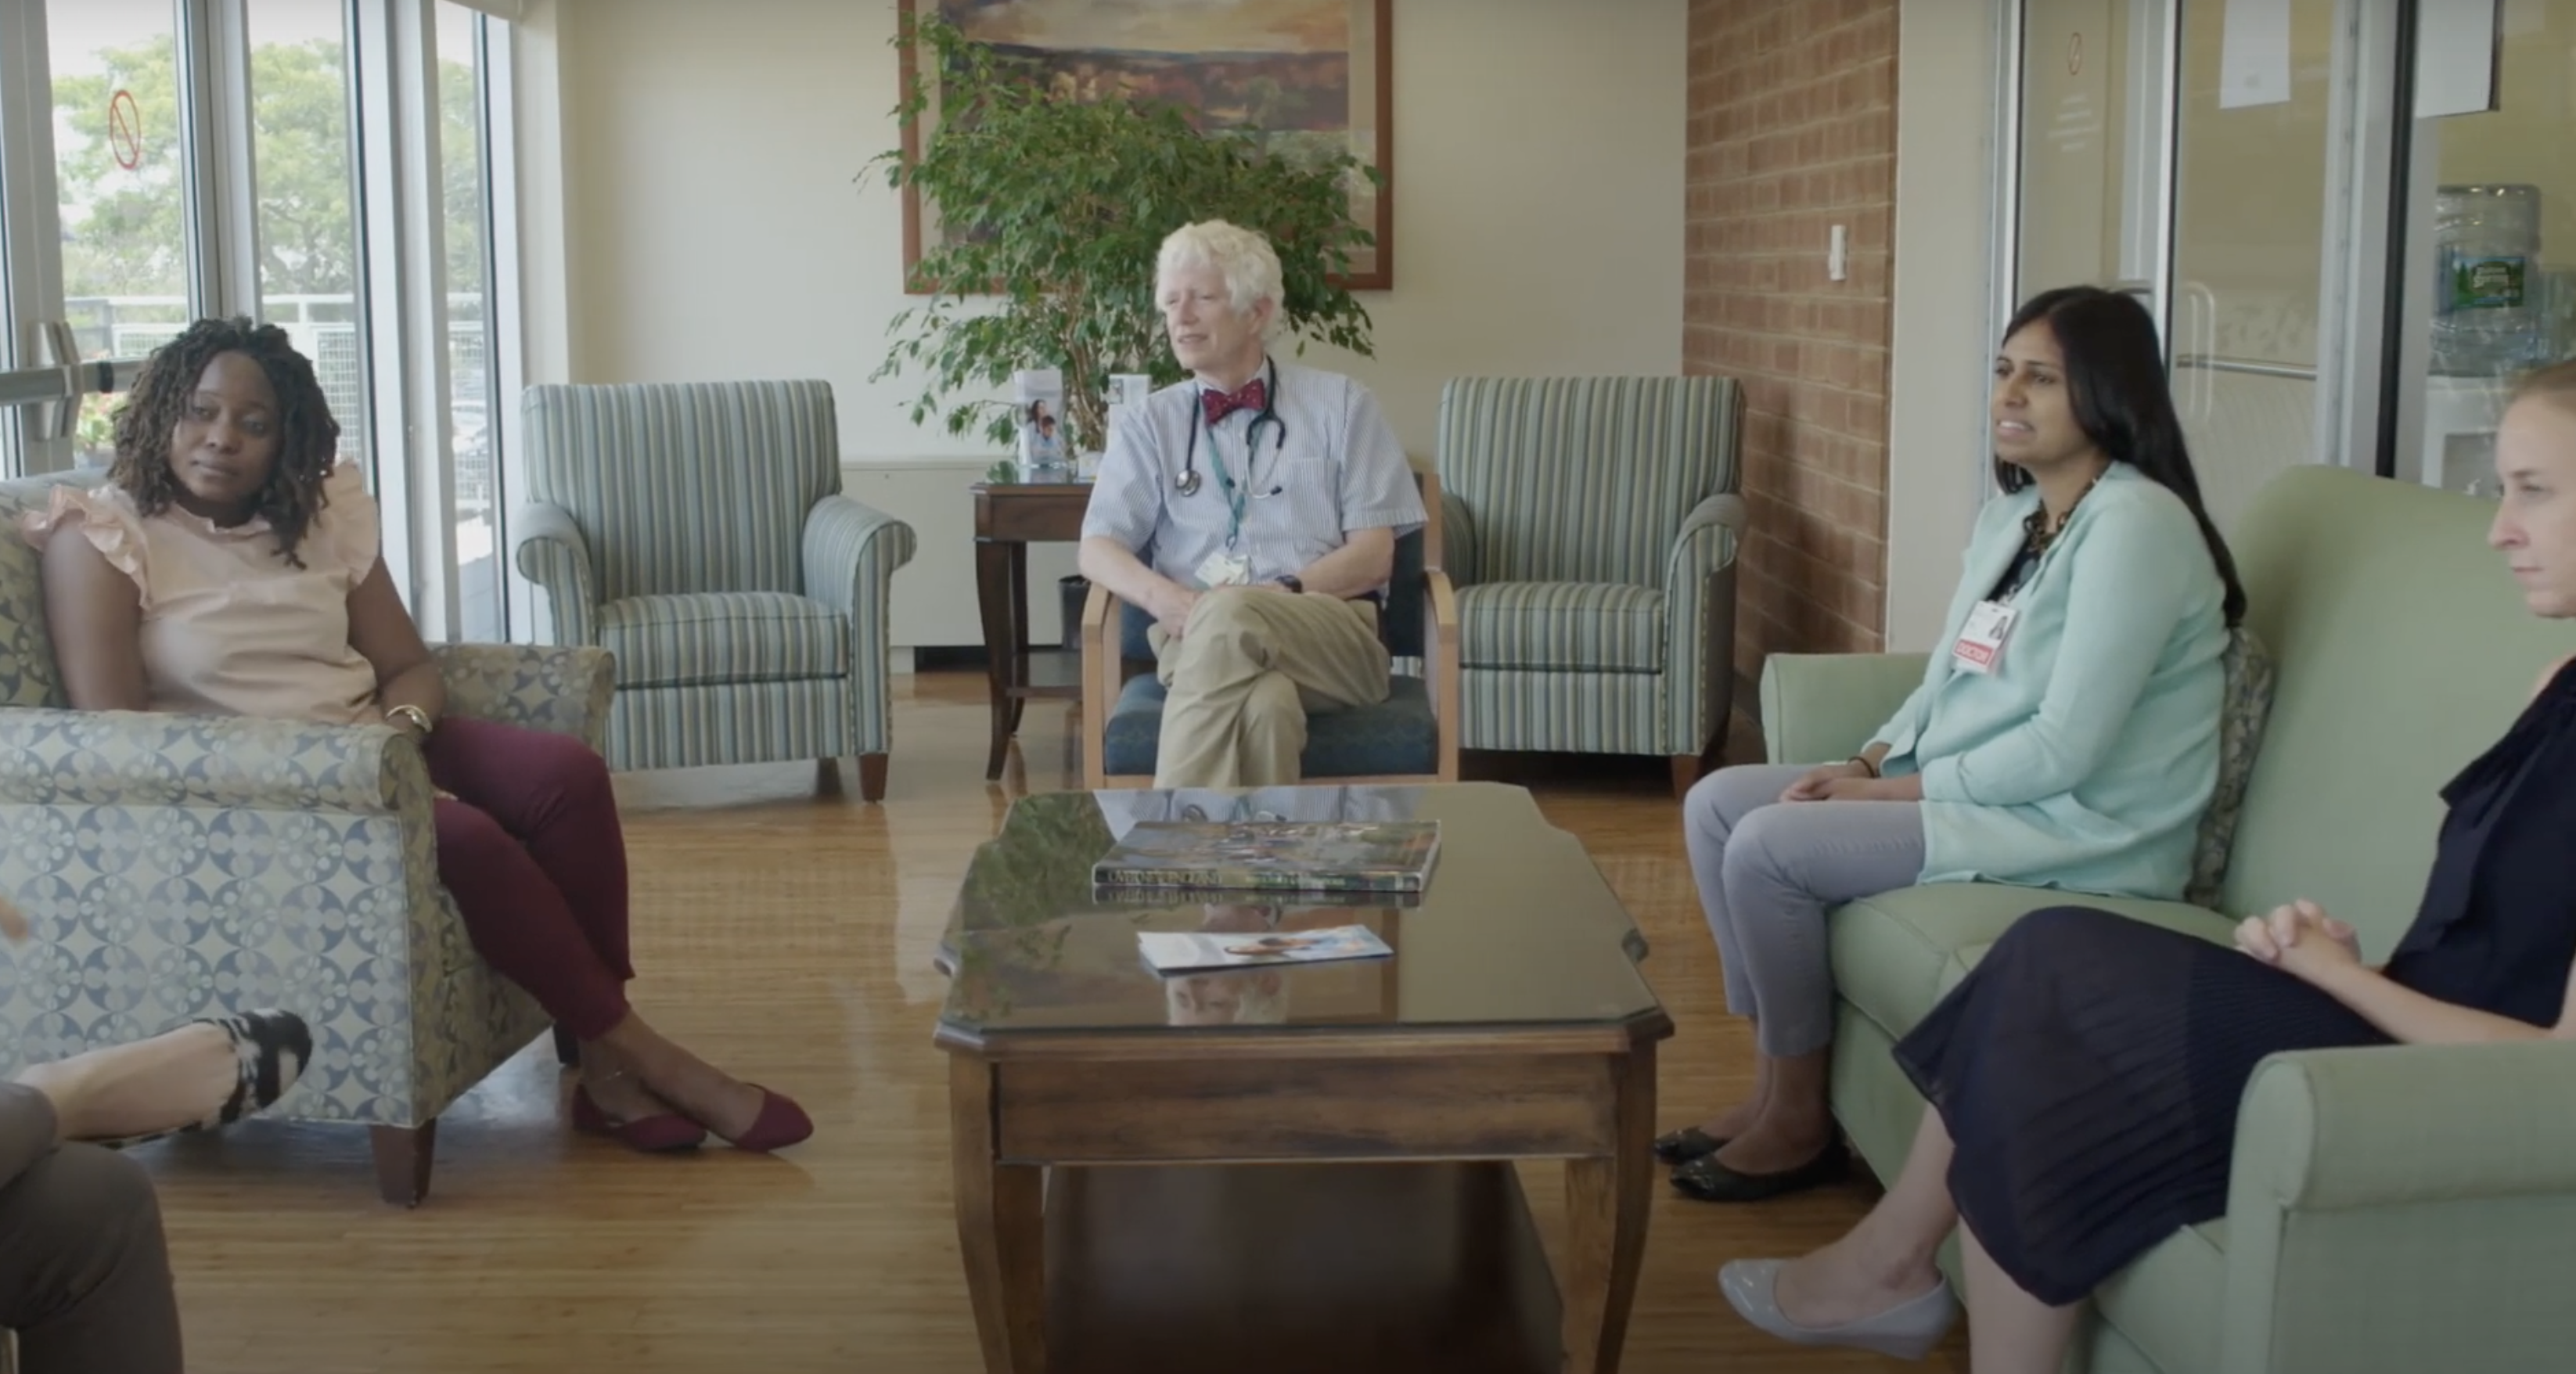 Doctors sitting around a coffee table discussing goals of care